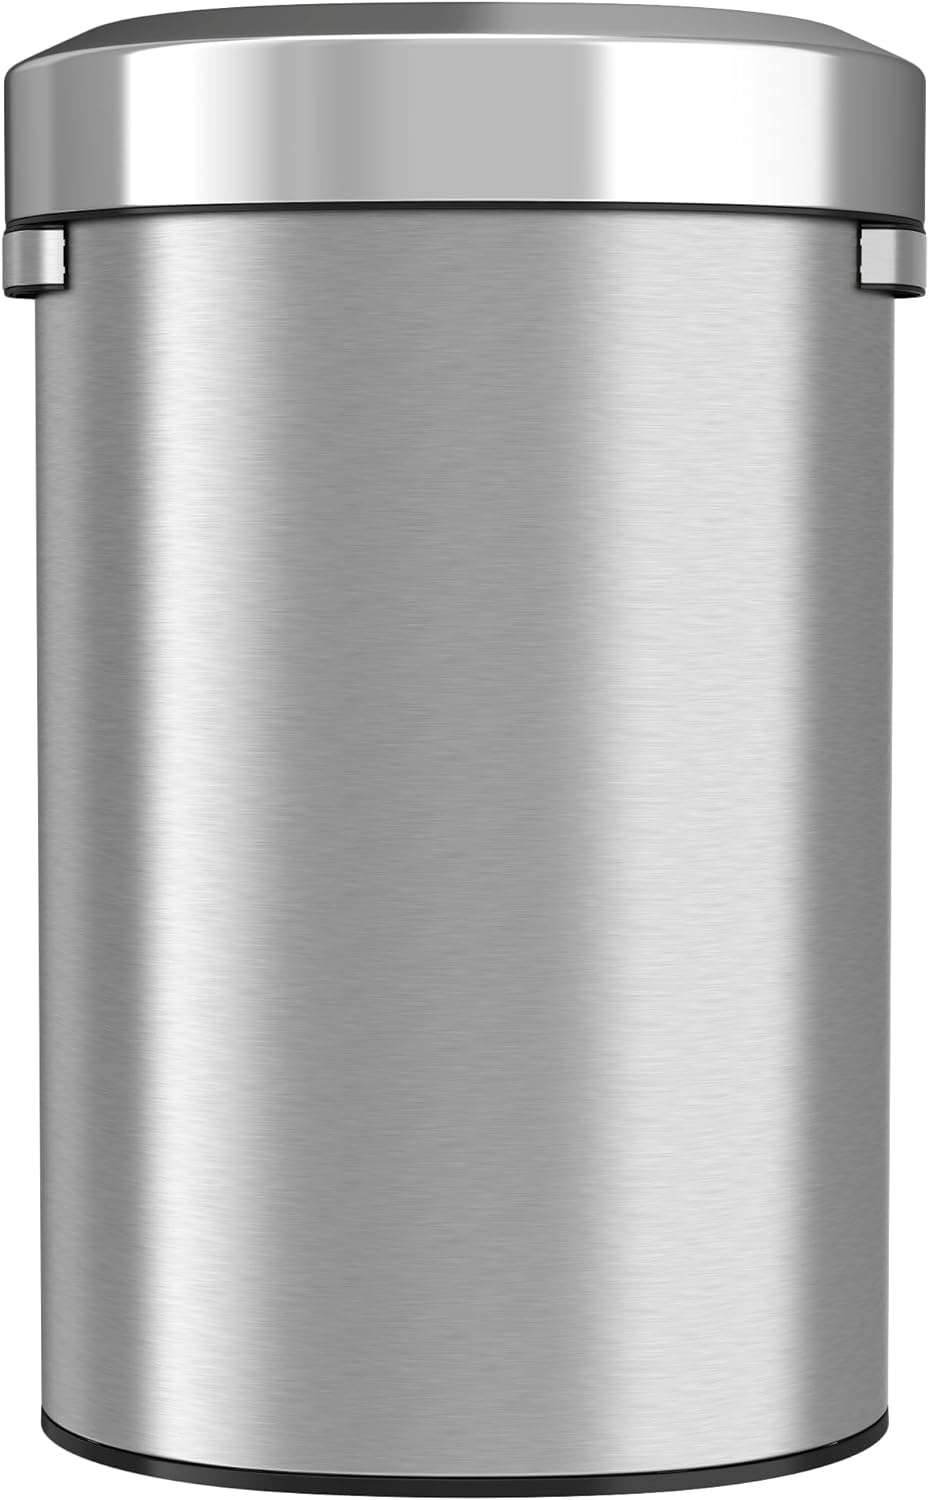 iTouchless 23 Gallon Stainless Steel Semi Round Open Top Trash Can and Recycle Bin